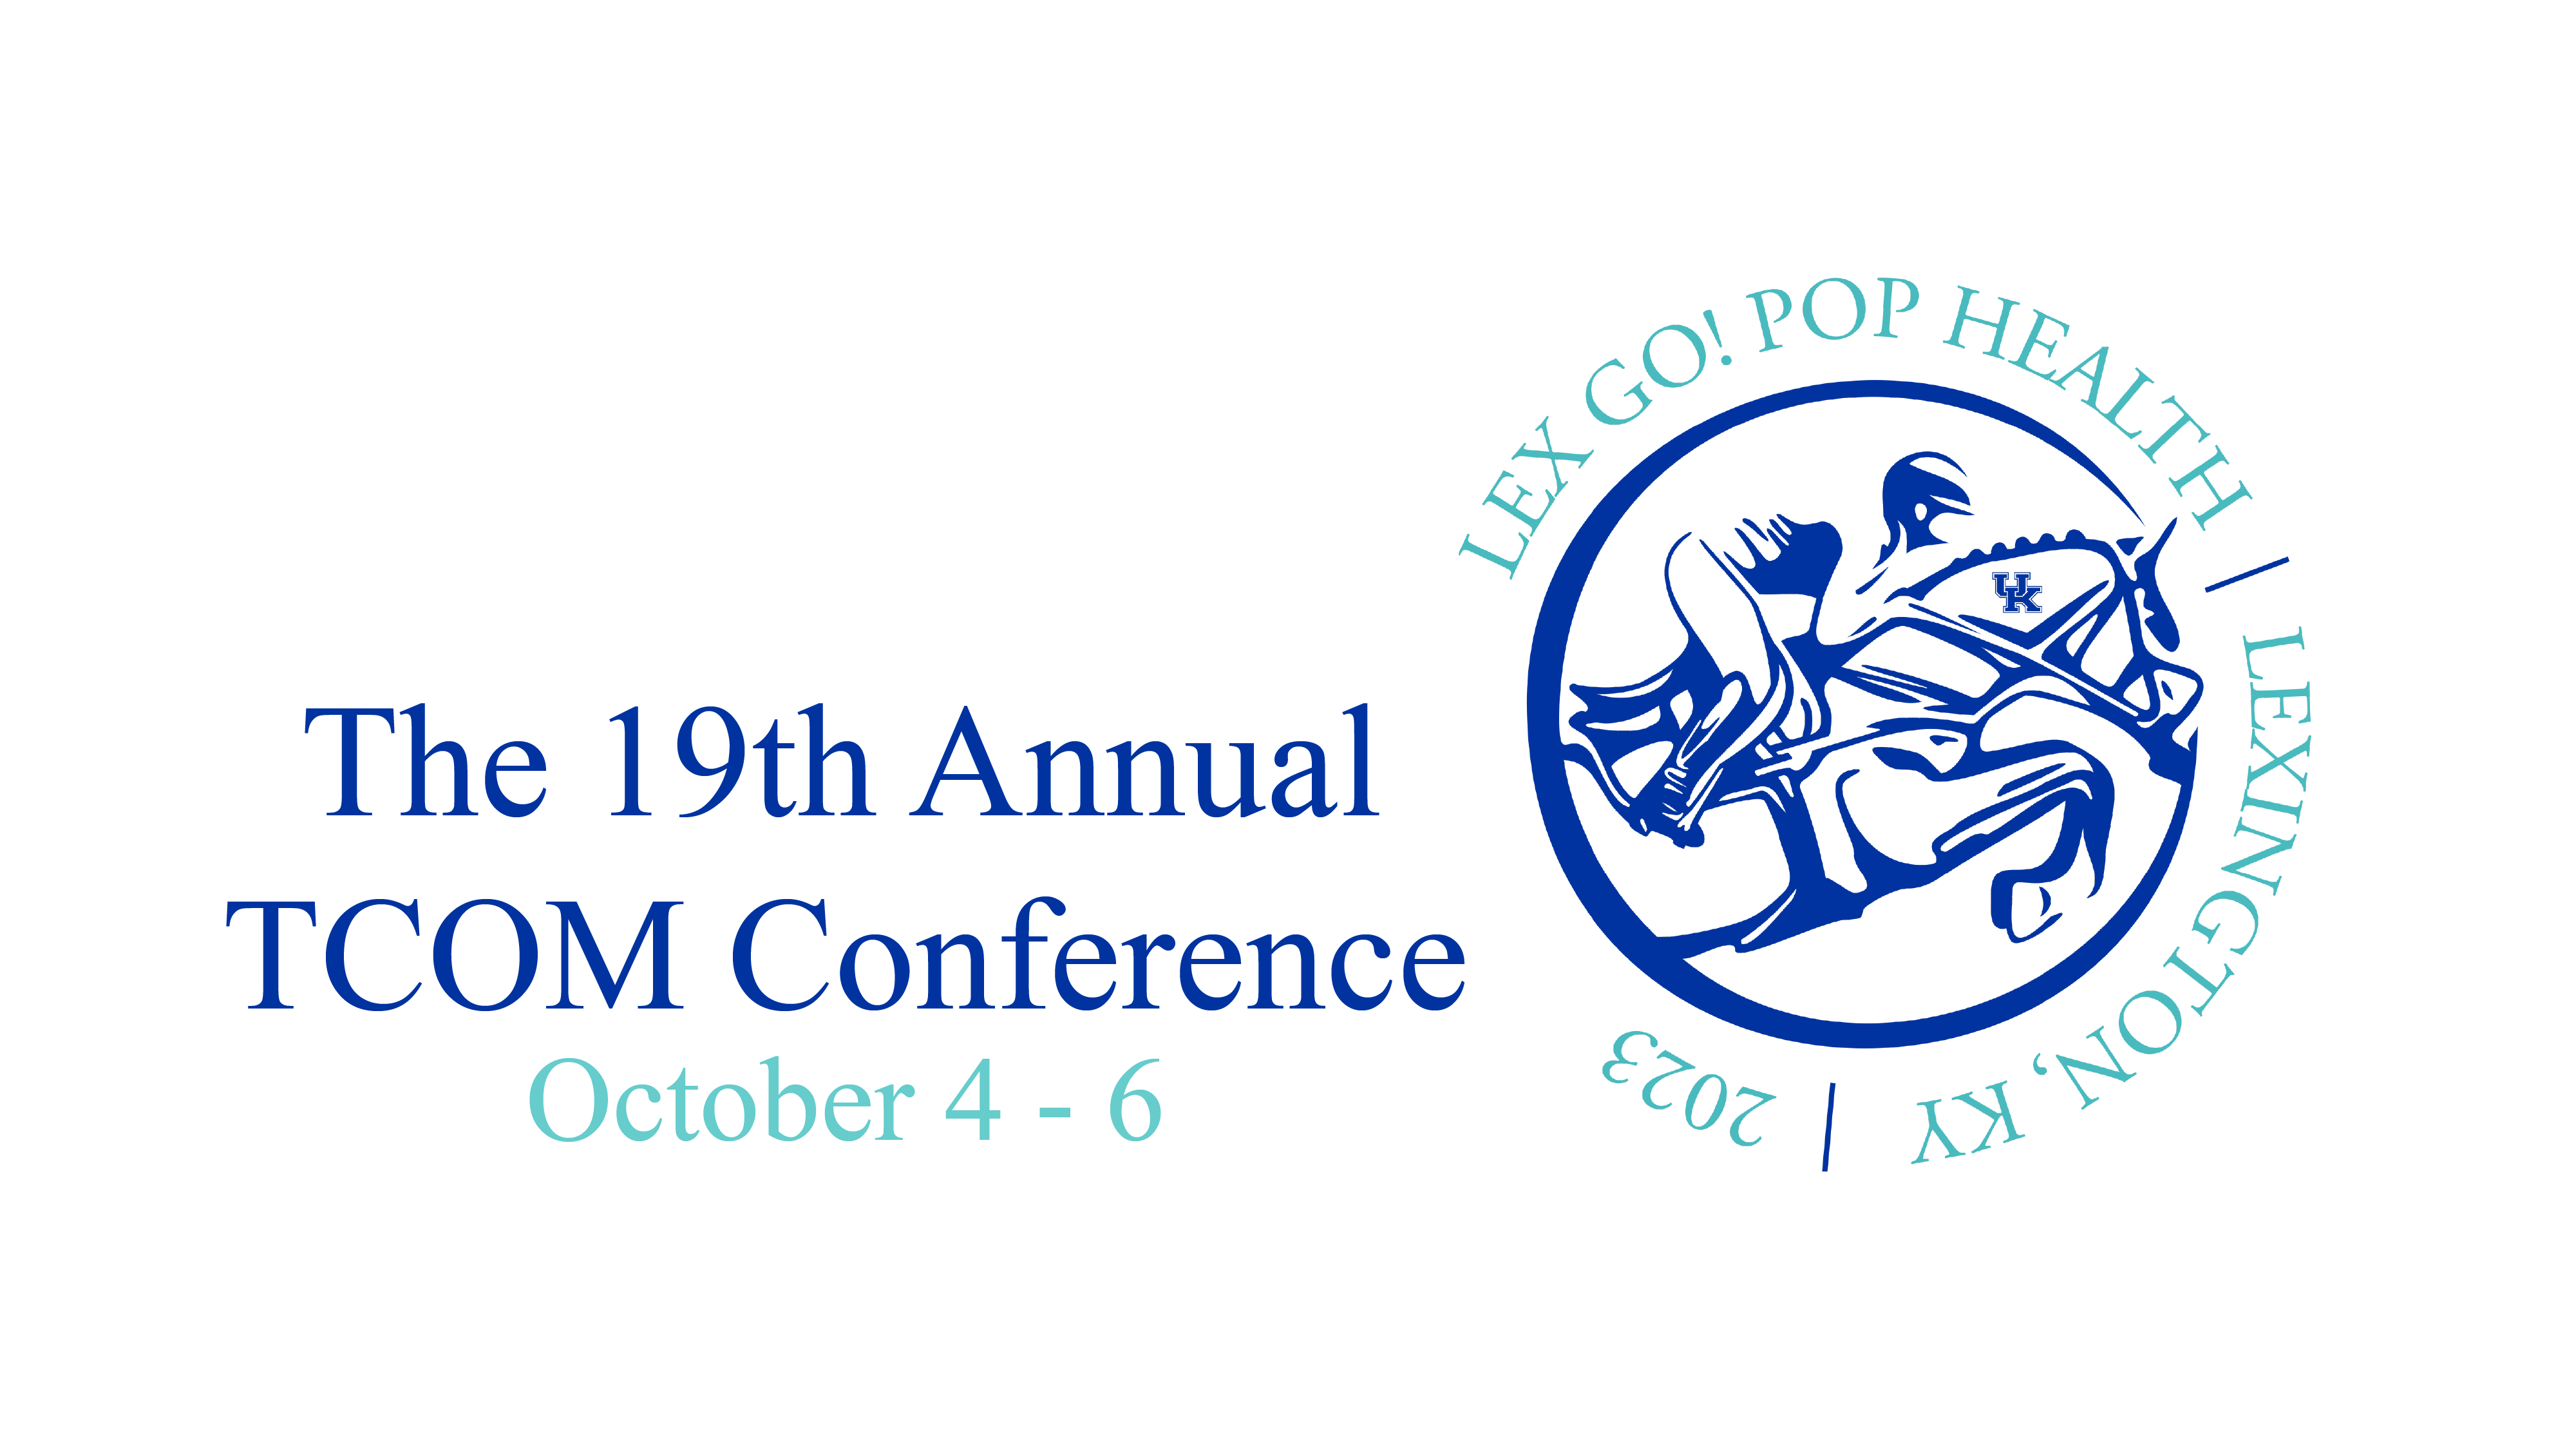 an illustrated poster stating "The 19th Annual TCOM Conference, October 4 - 6"